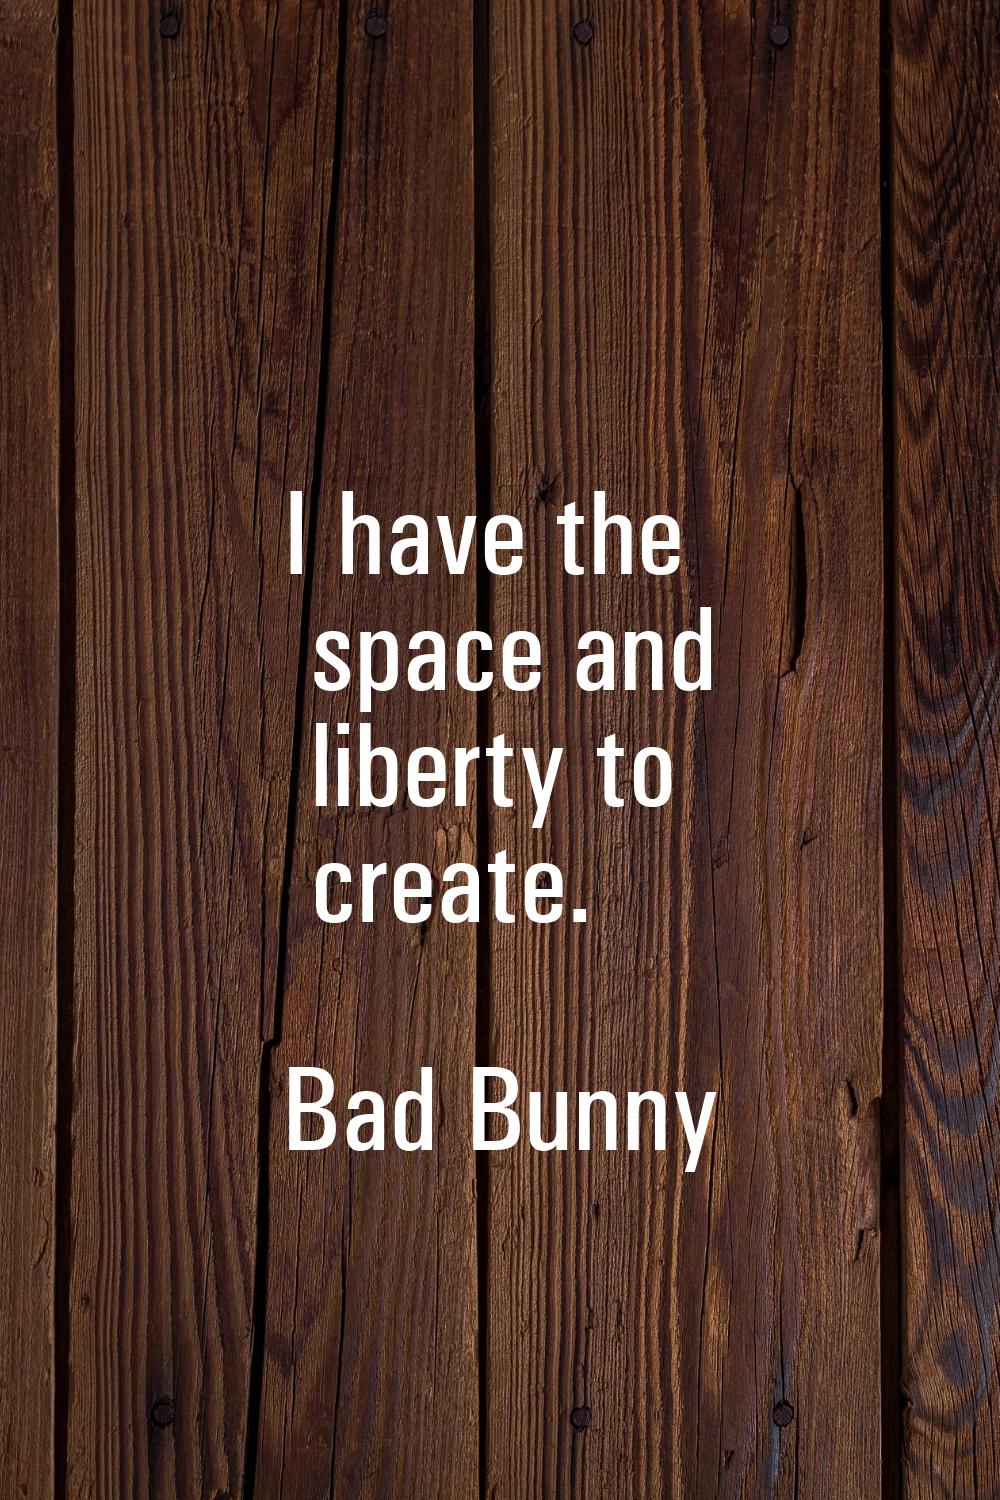 I have the space and liberty to create.